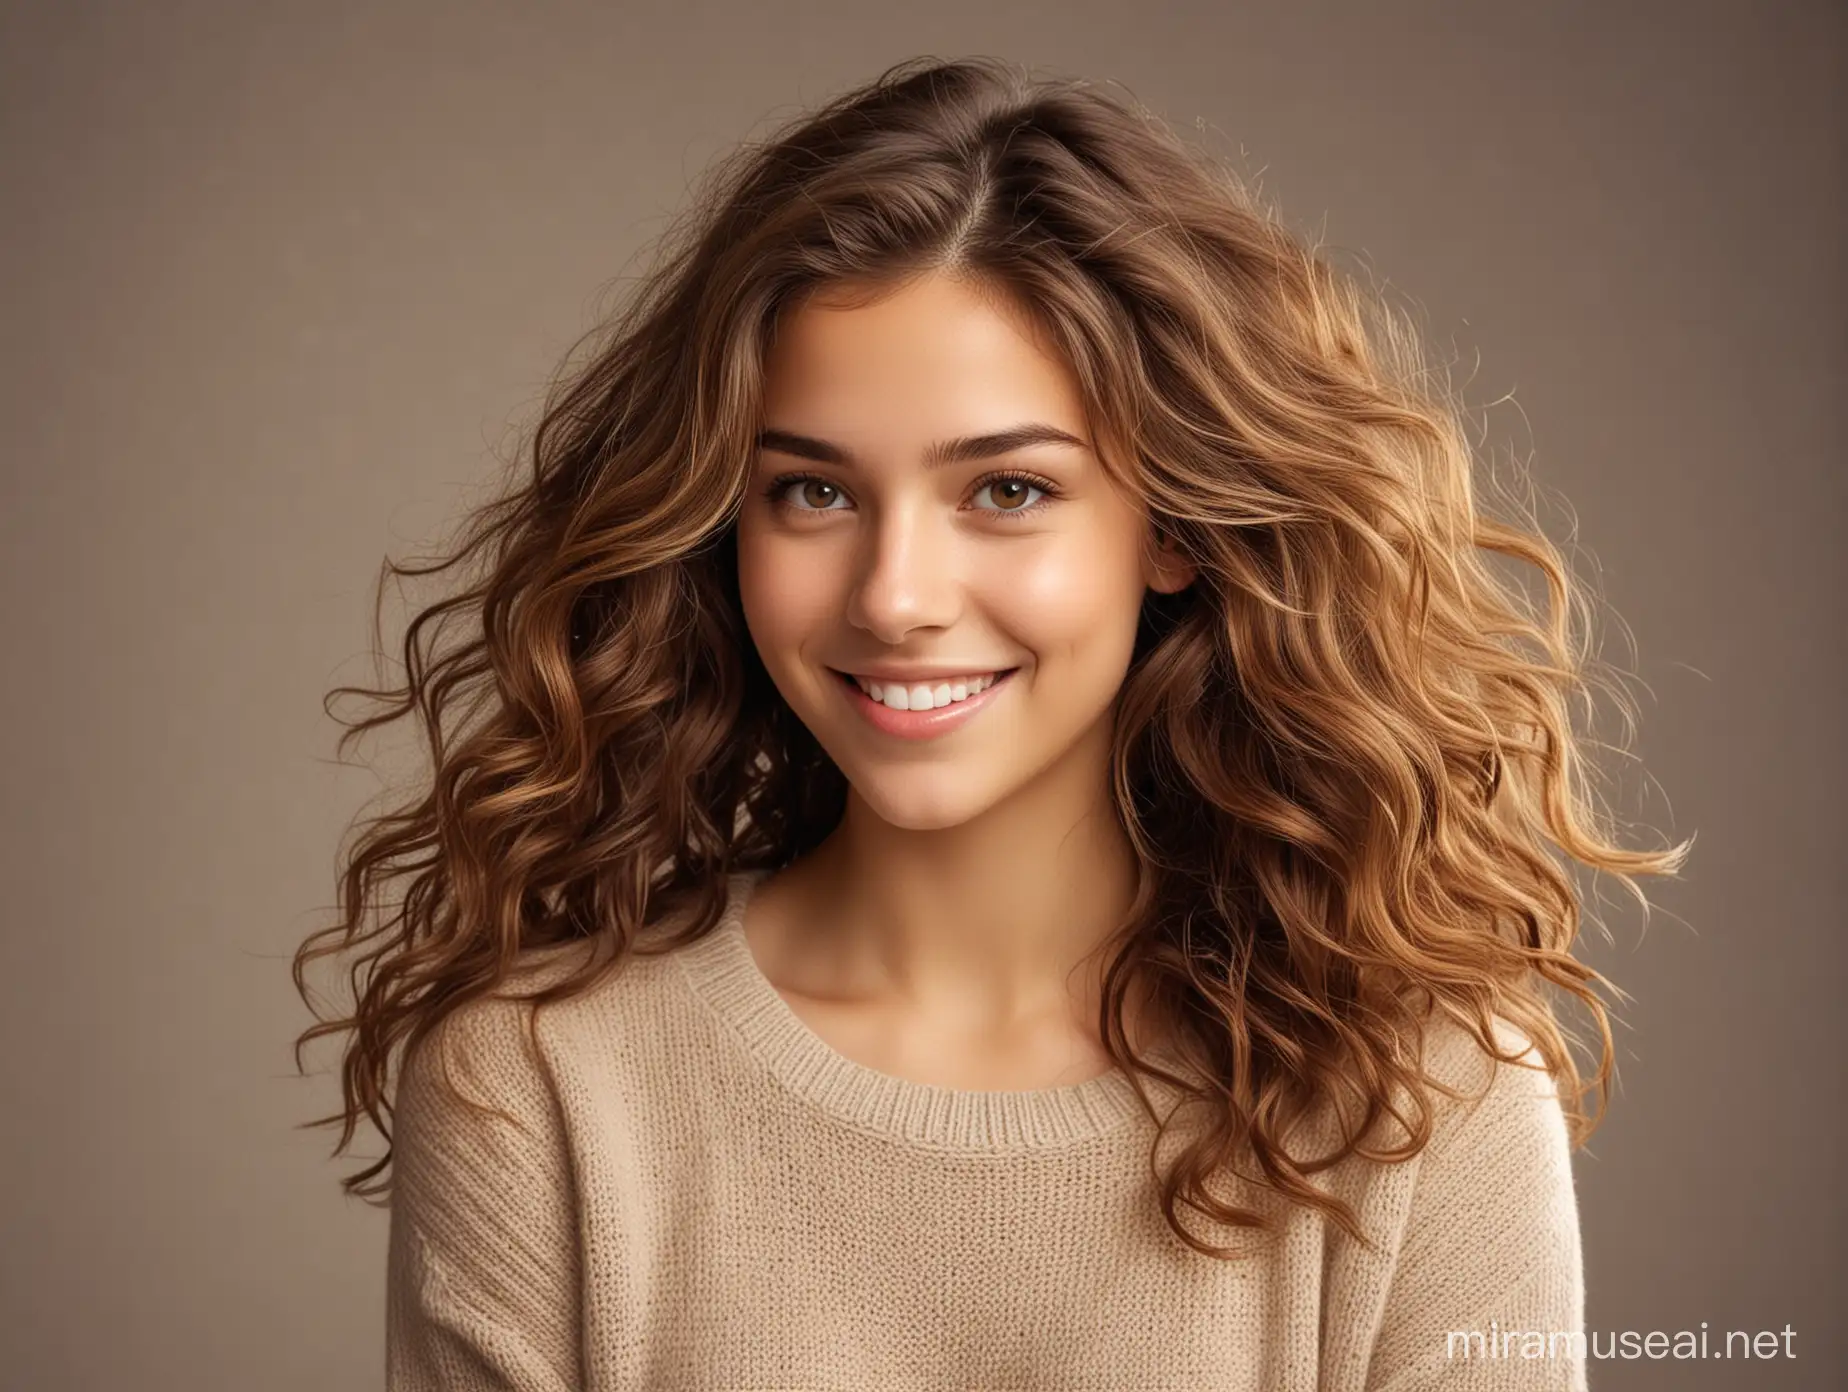 Radiant Beauty Captivating Young Girl with Luscious Hair and Stylish Sweater